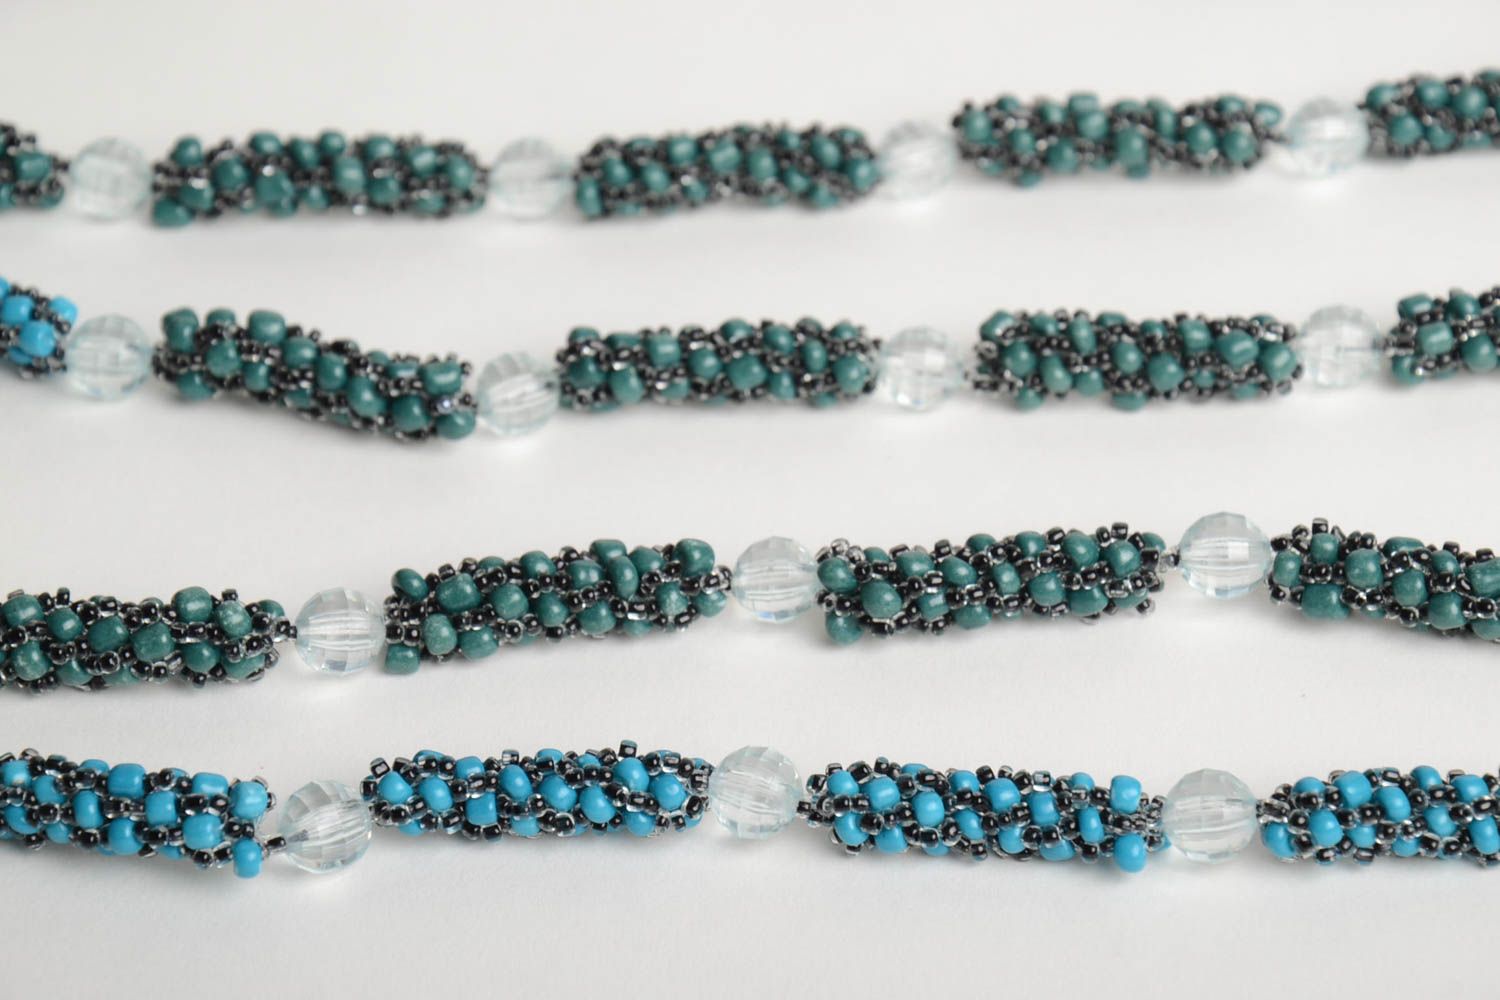 Handmade long women's necklace crocheted of Czech beads of turquoise color photo 4